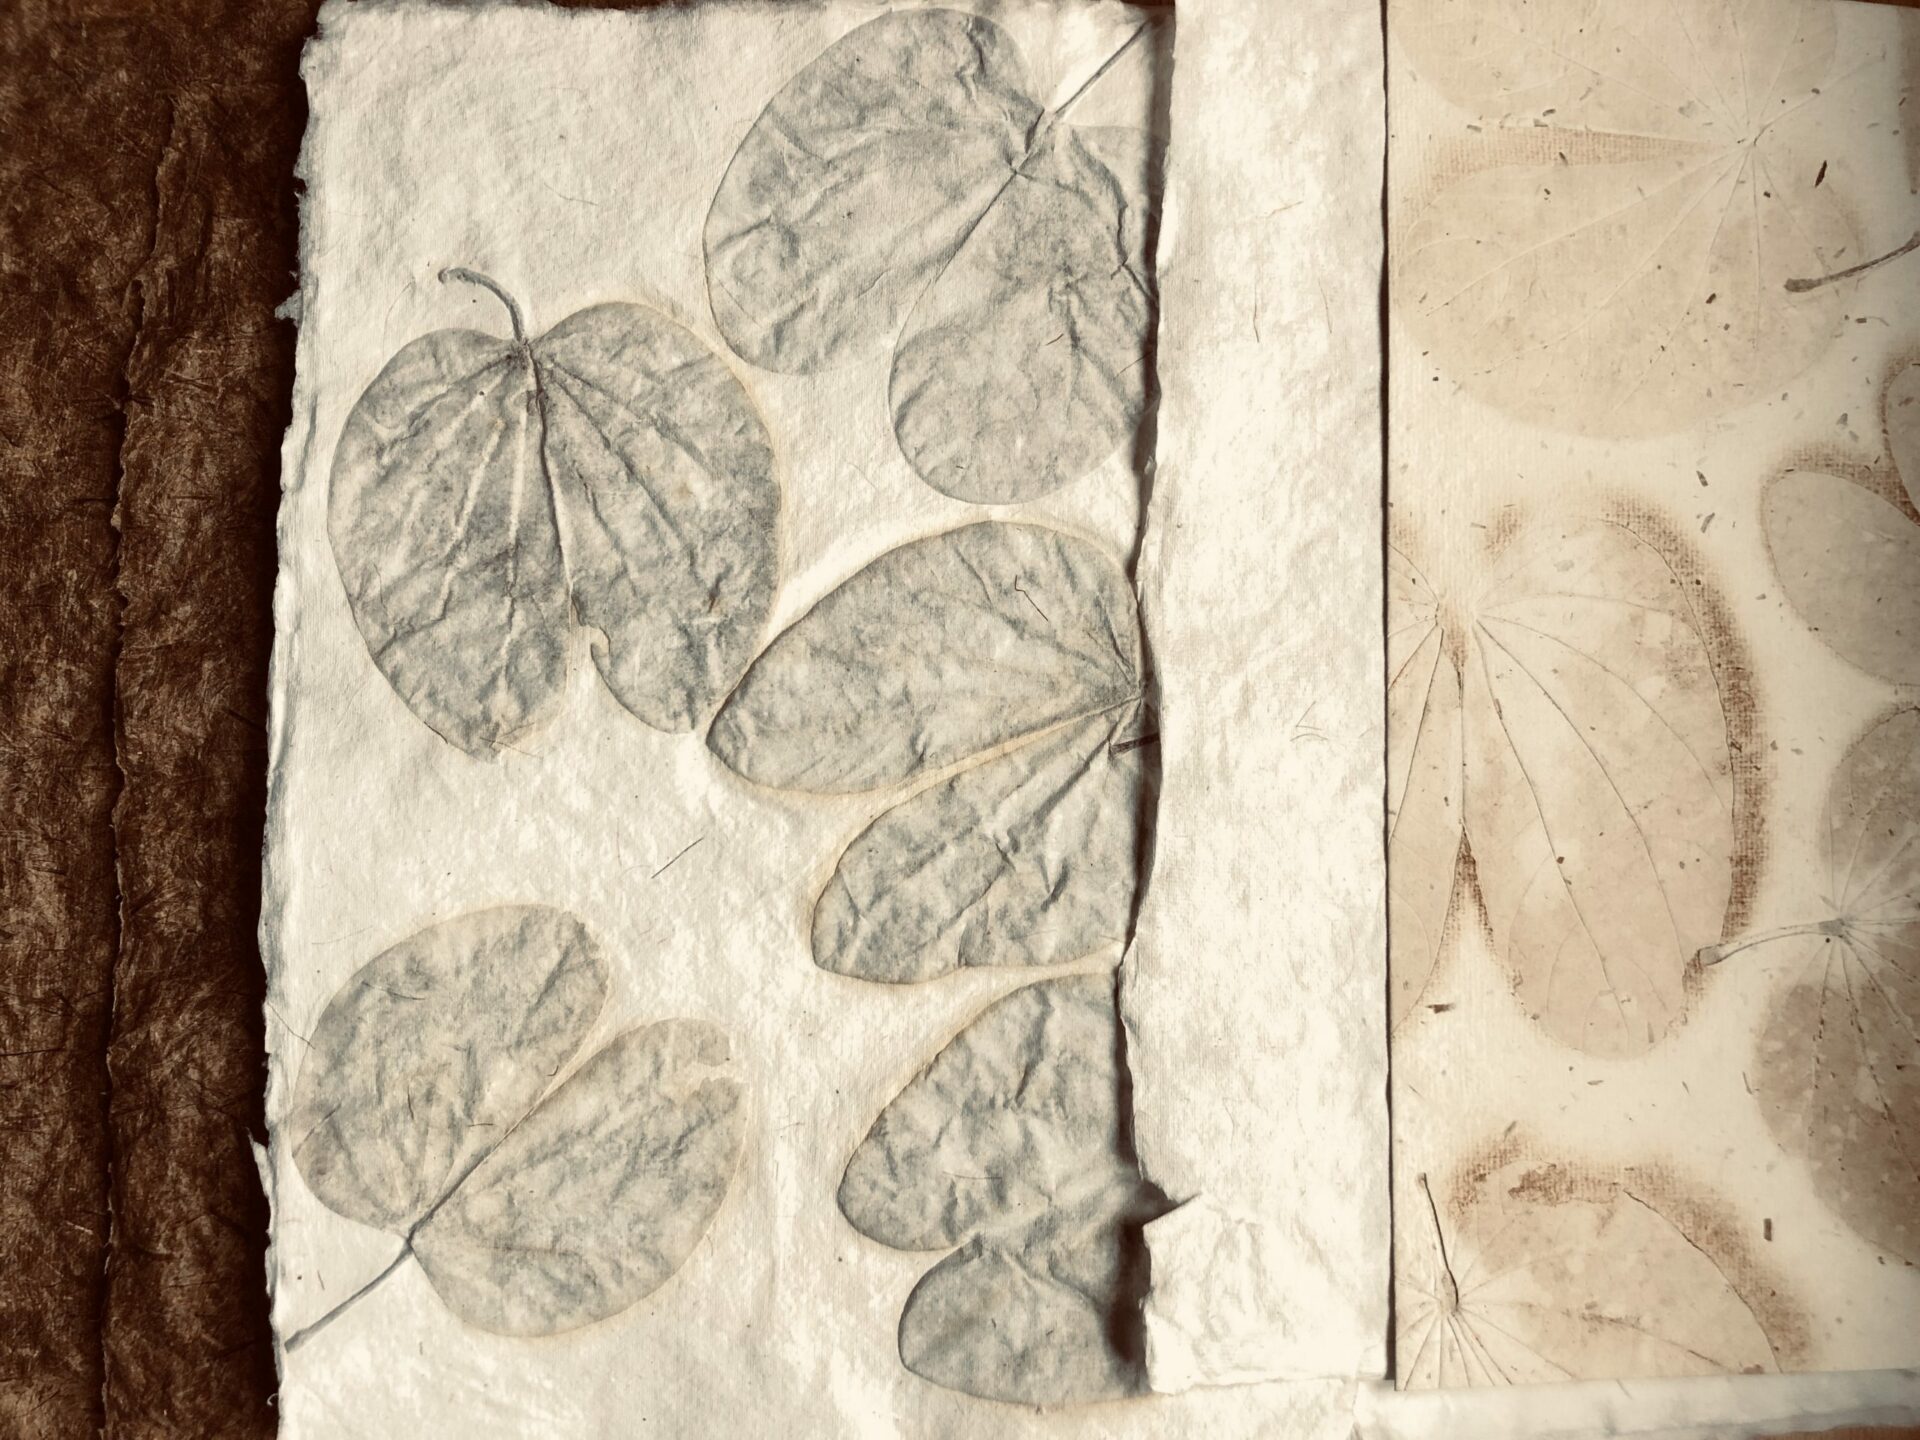 The Papermaking Process